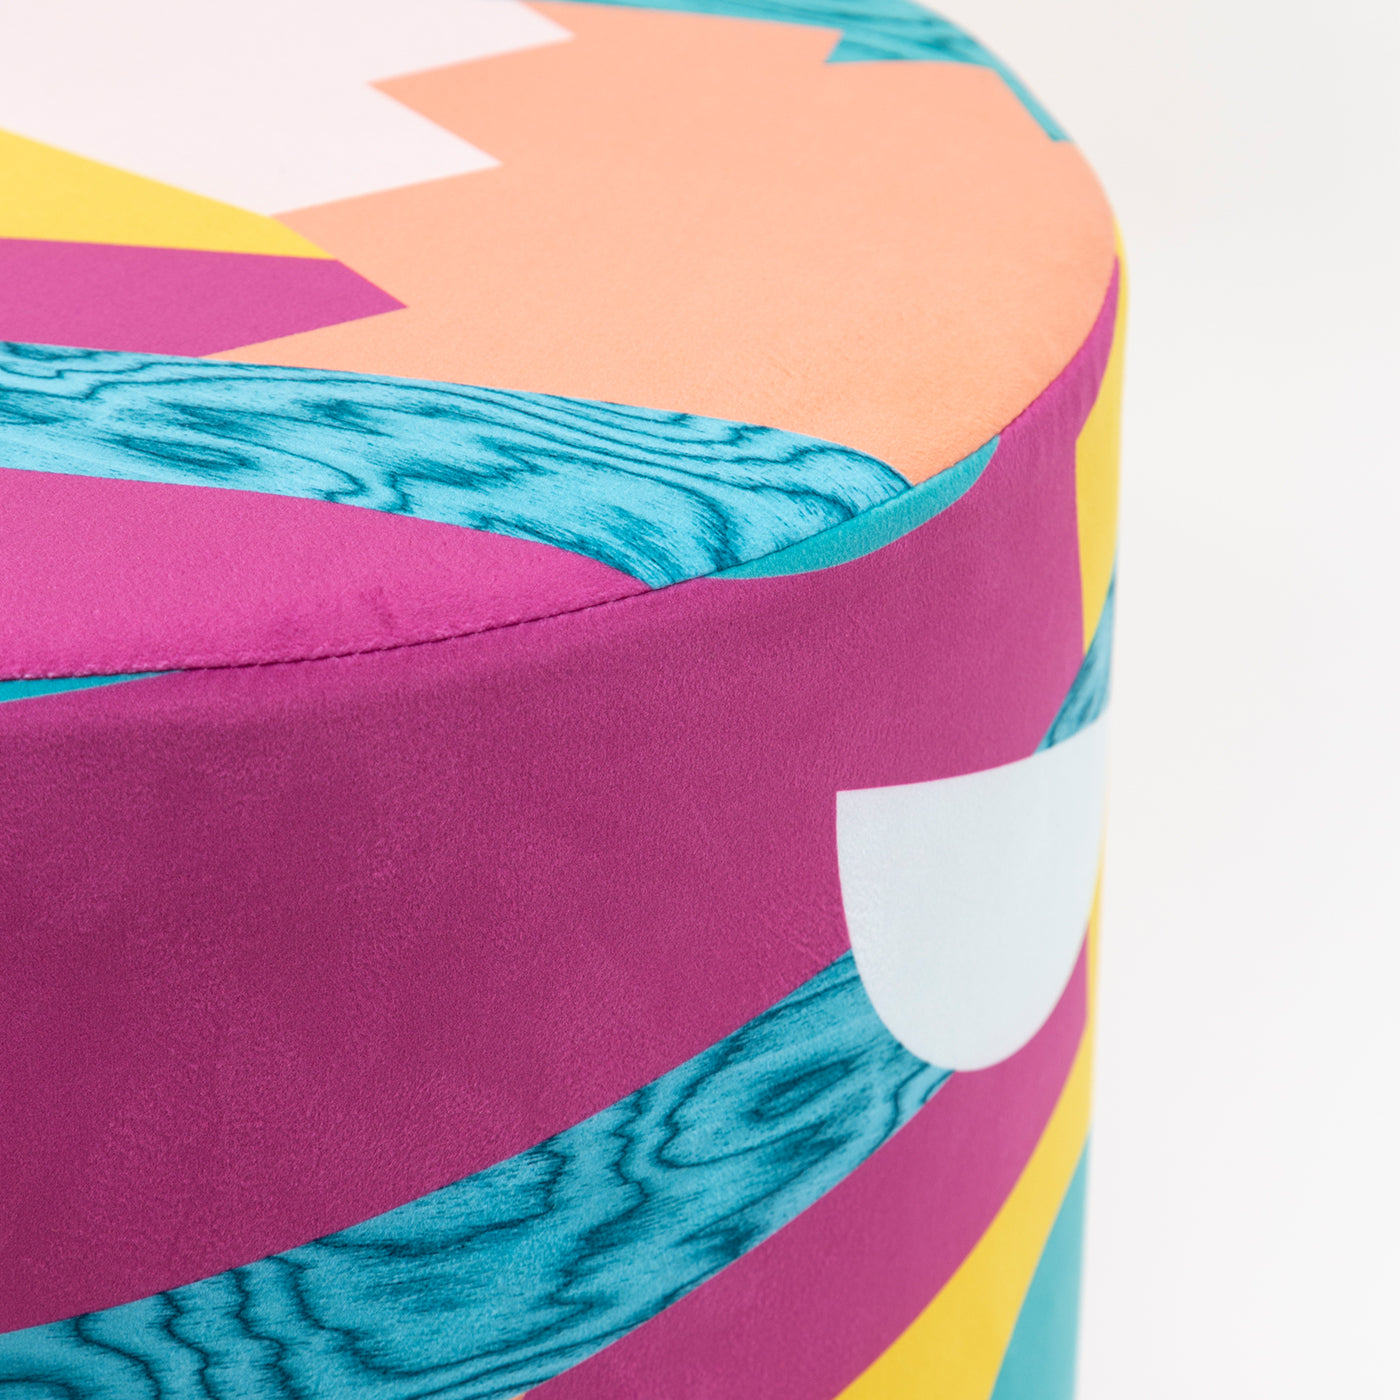 Alchimie Abstract Decor Velvet and MDF Pouf #2 - Alternative view 2